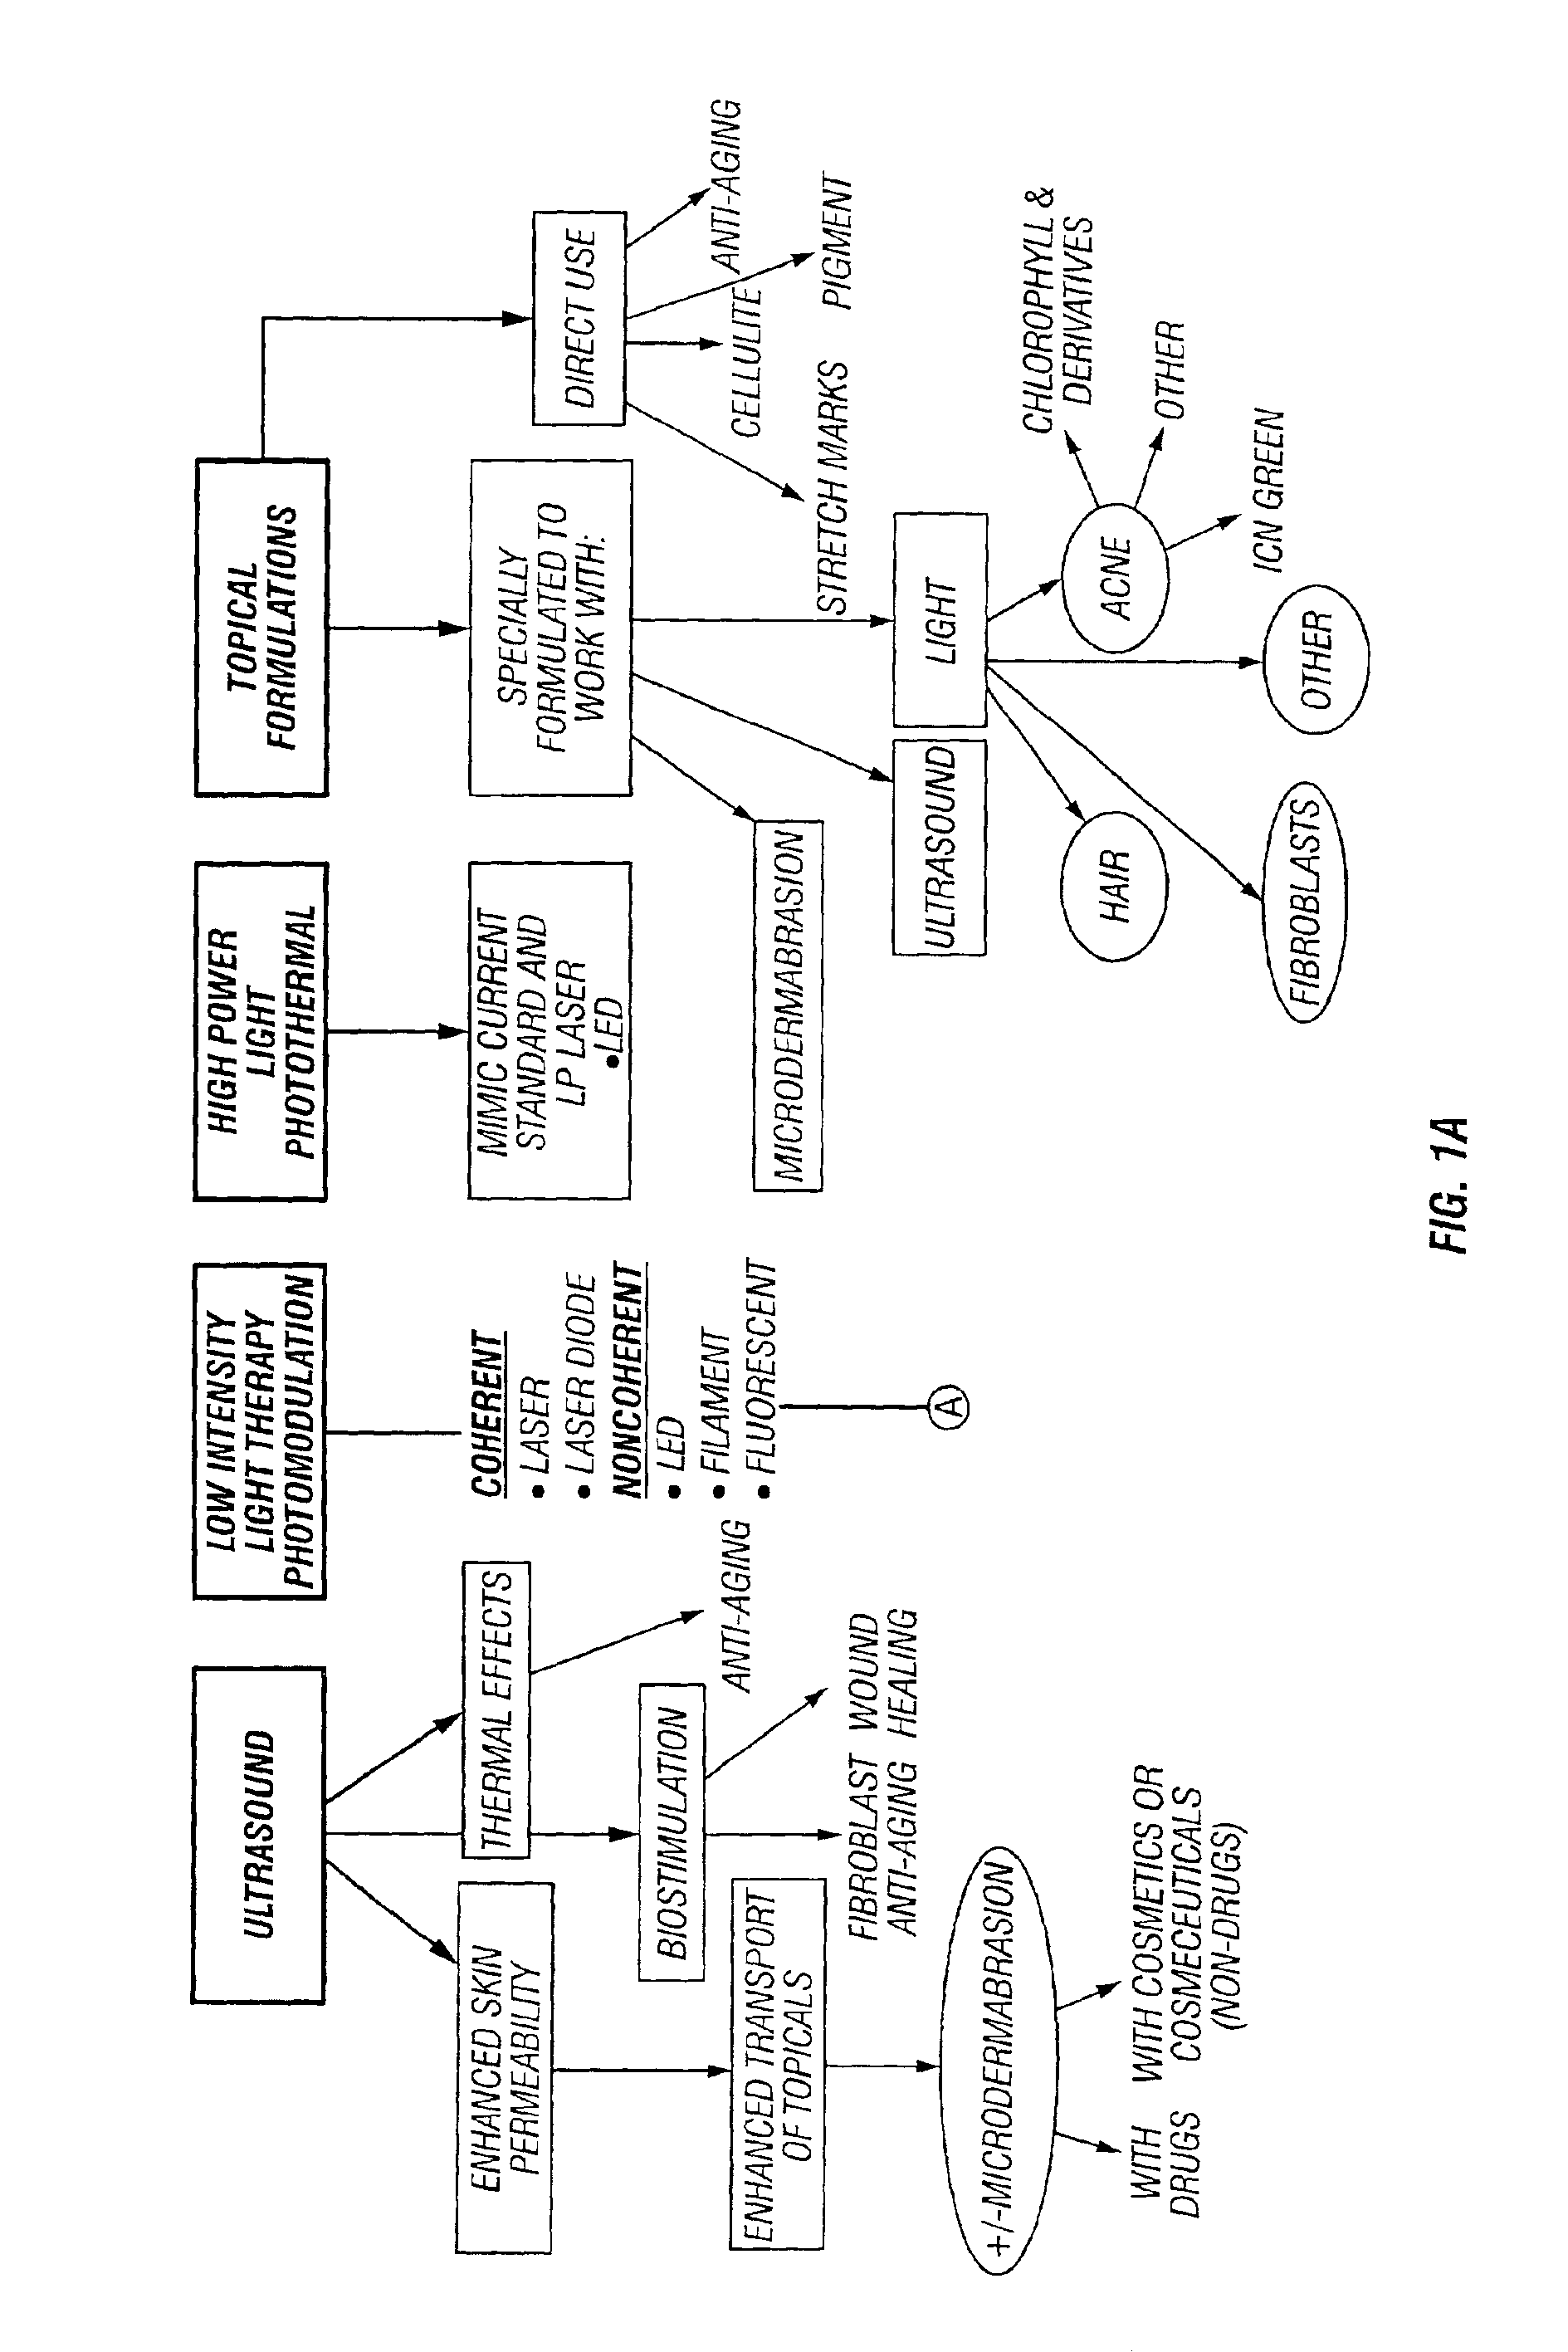 Method and apparatus for the stimulation of hair growth